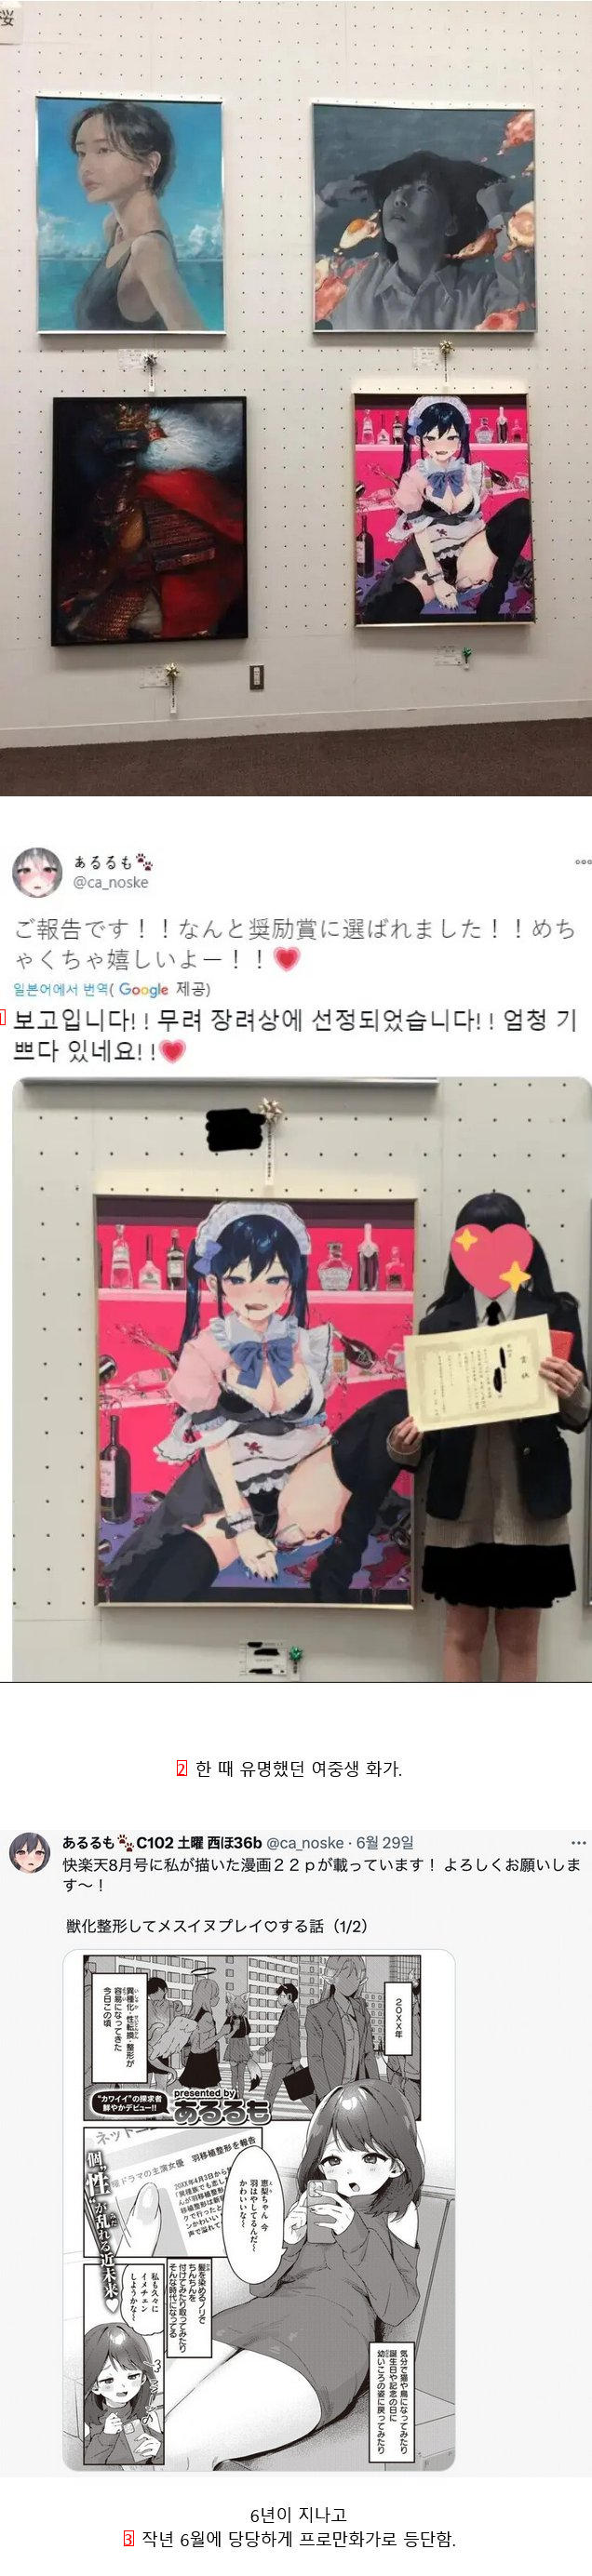 Japanese middle school girl artist who was once famous.jpg